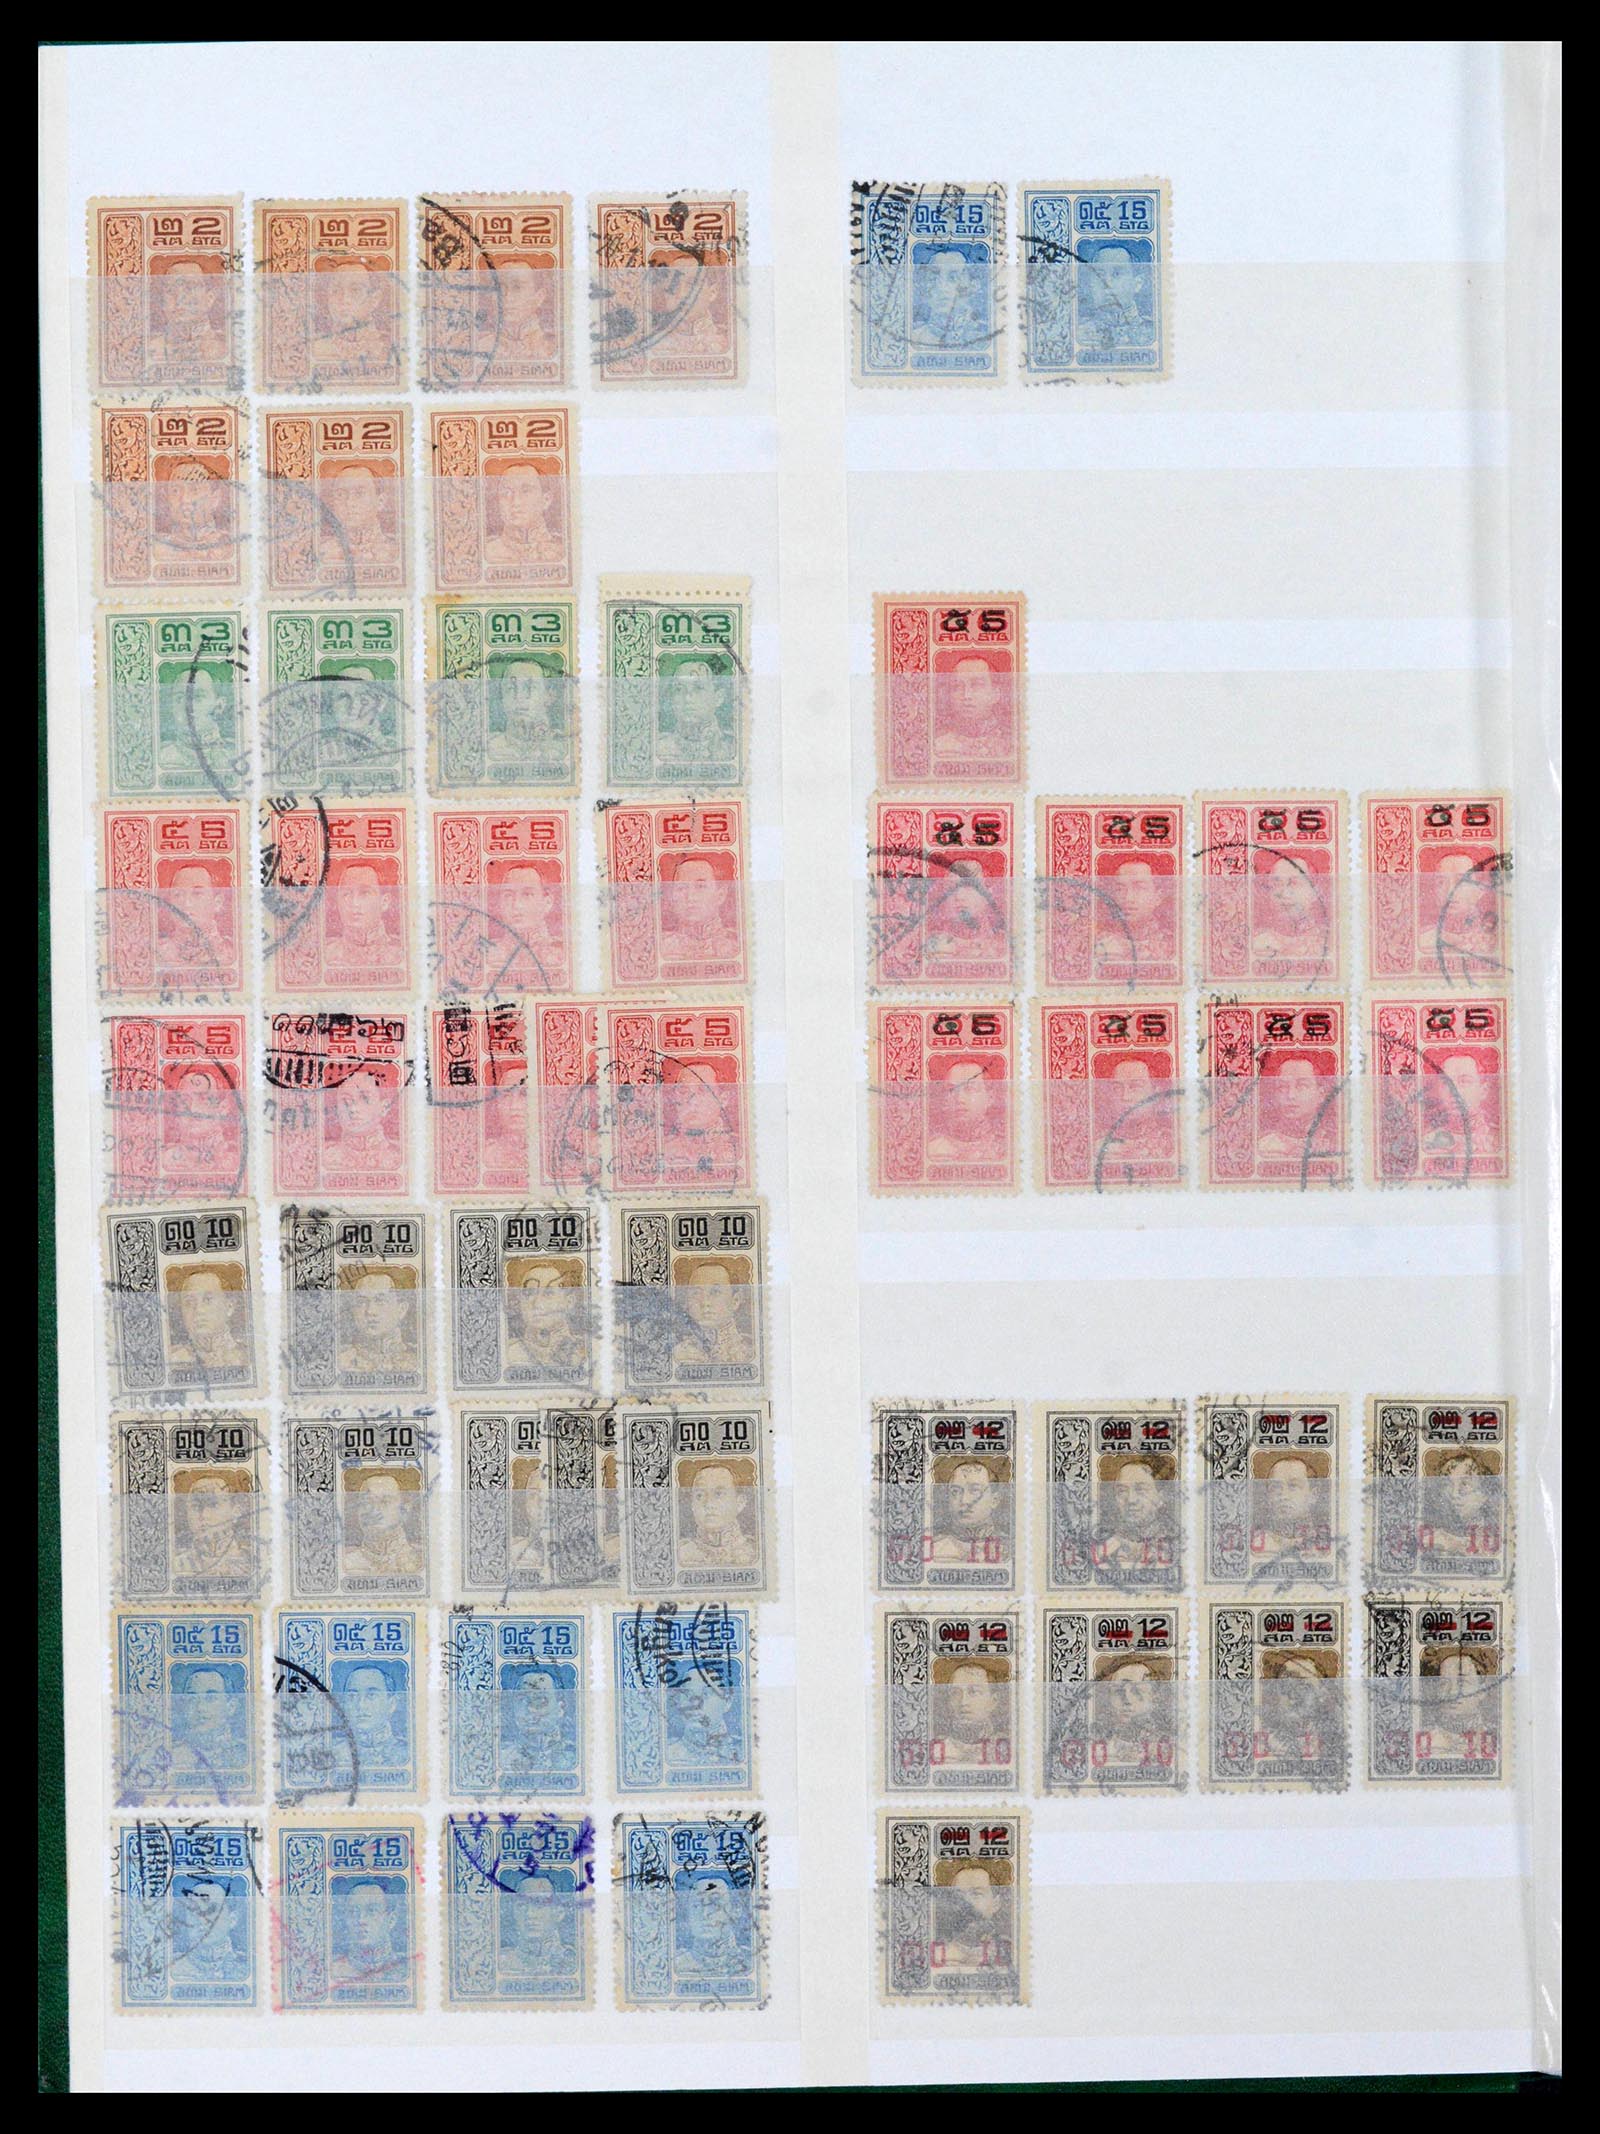 39384 0010 - Stamp collection 39384 Thailand 1883-2014.